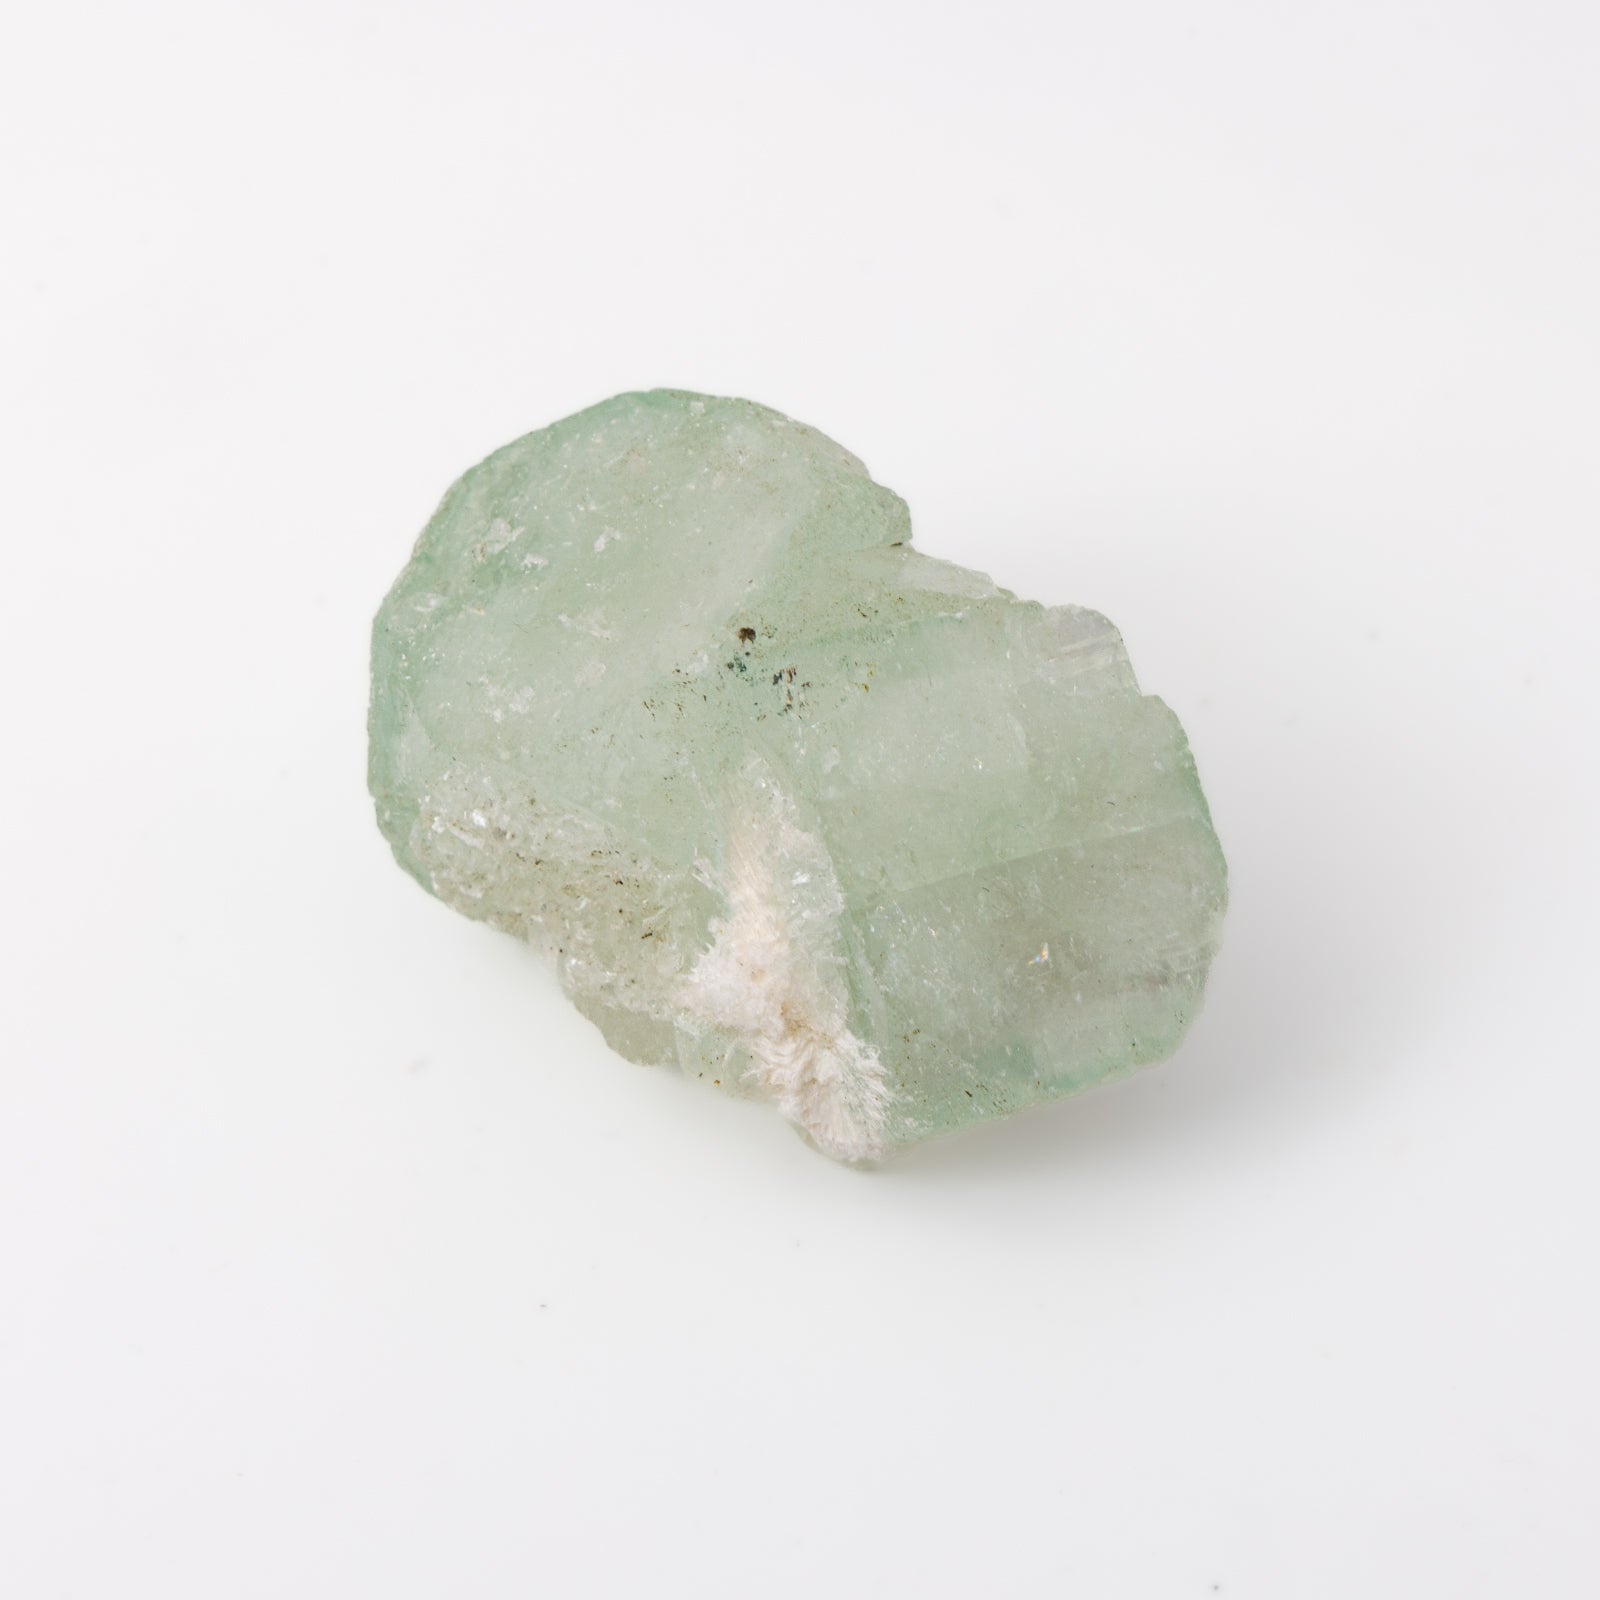 Green Apophyllite Crystal - Roughly measures 1.5" x 1", shapes and sizes may vary. All stones intuitively chosen